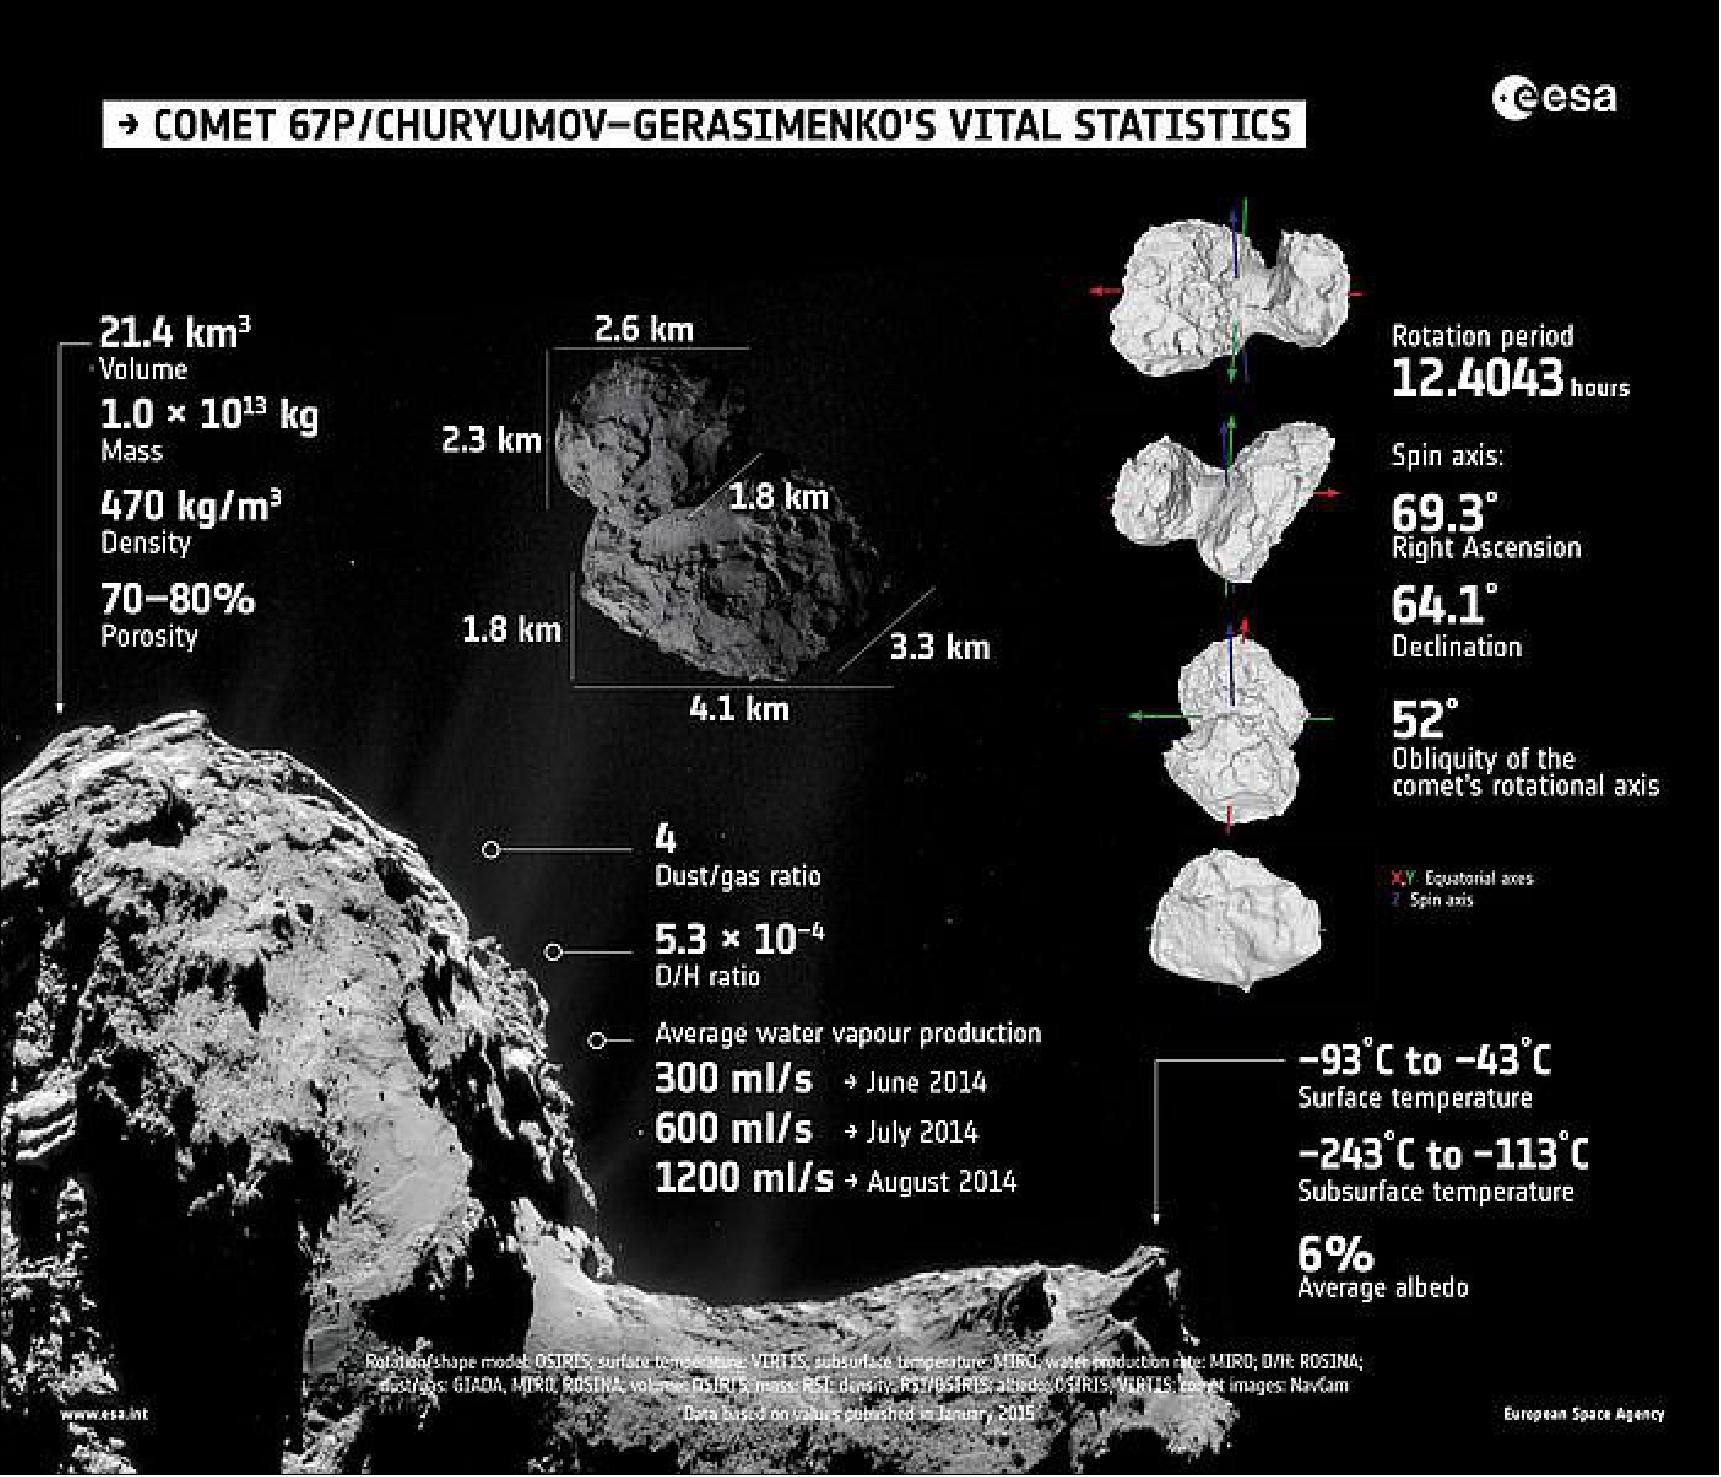 Figure 149: Summary of the comet's vital statistics as determined by Rosetta’s instruments during the first few months of its comet encounter (image credit: ESA)